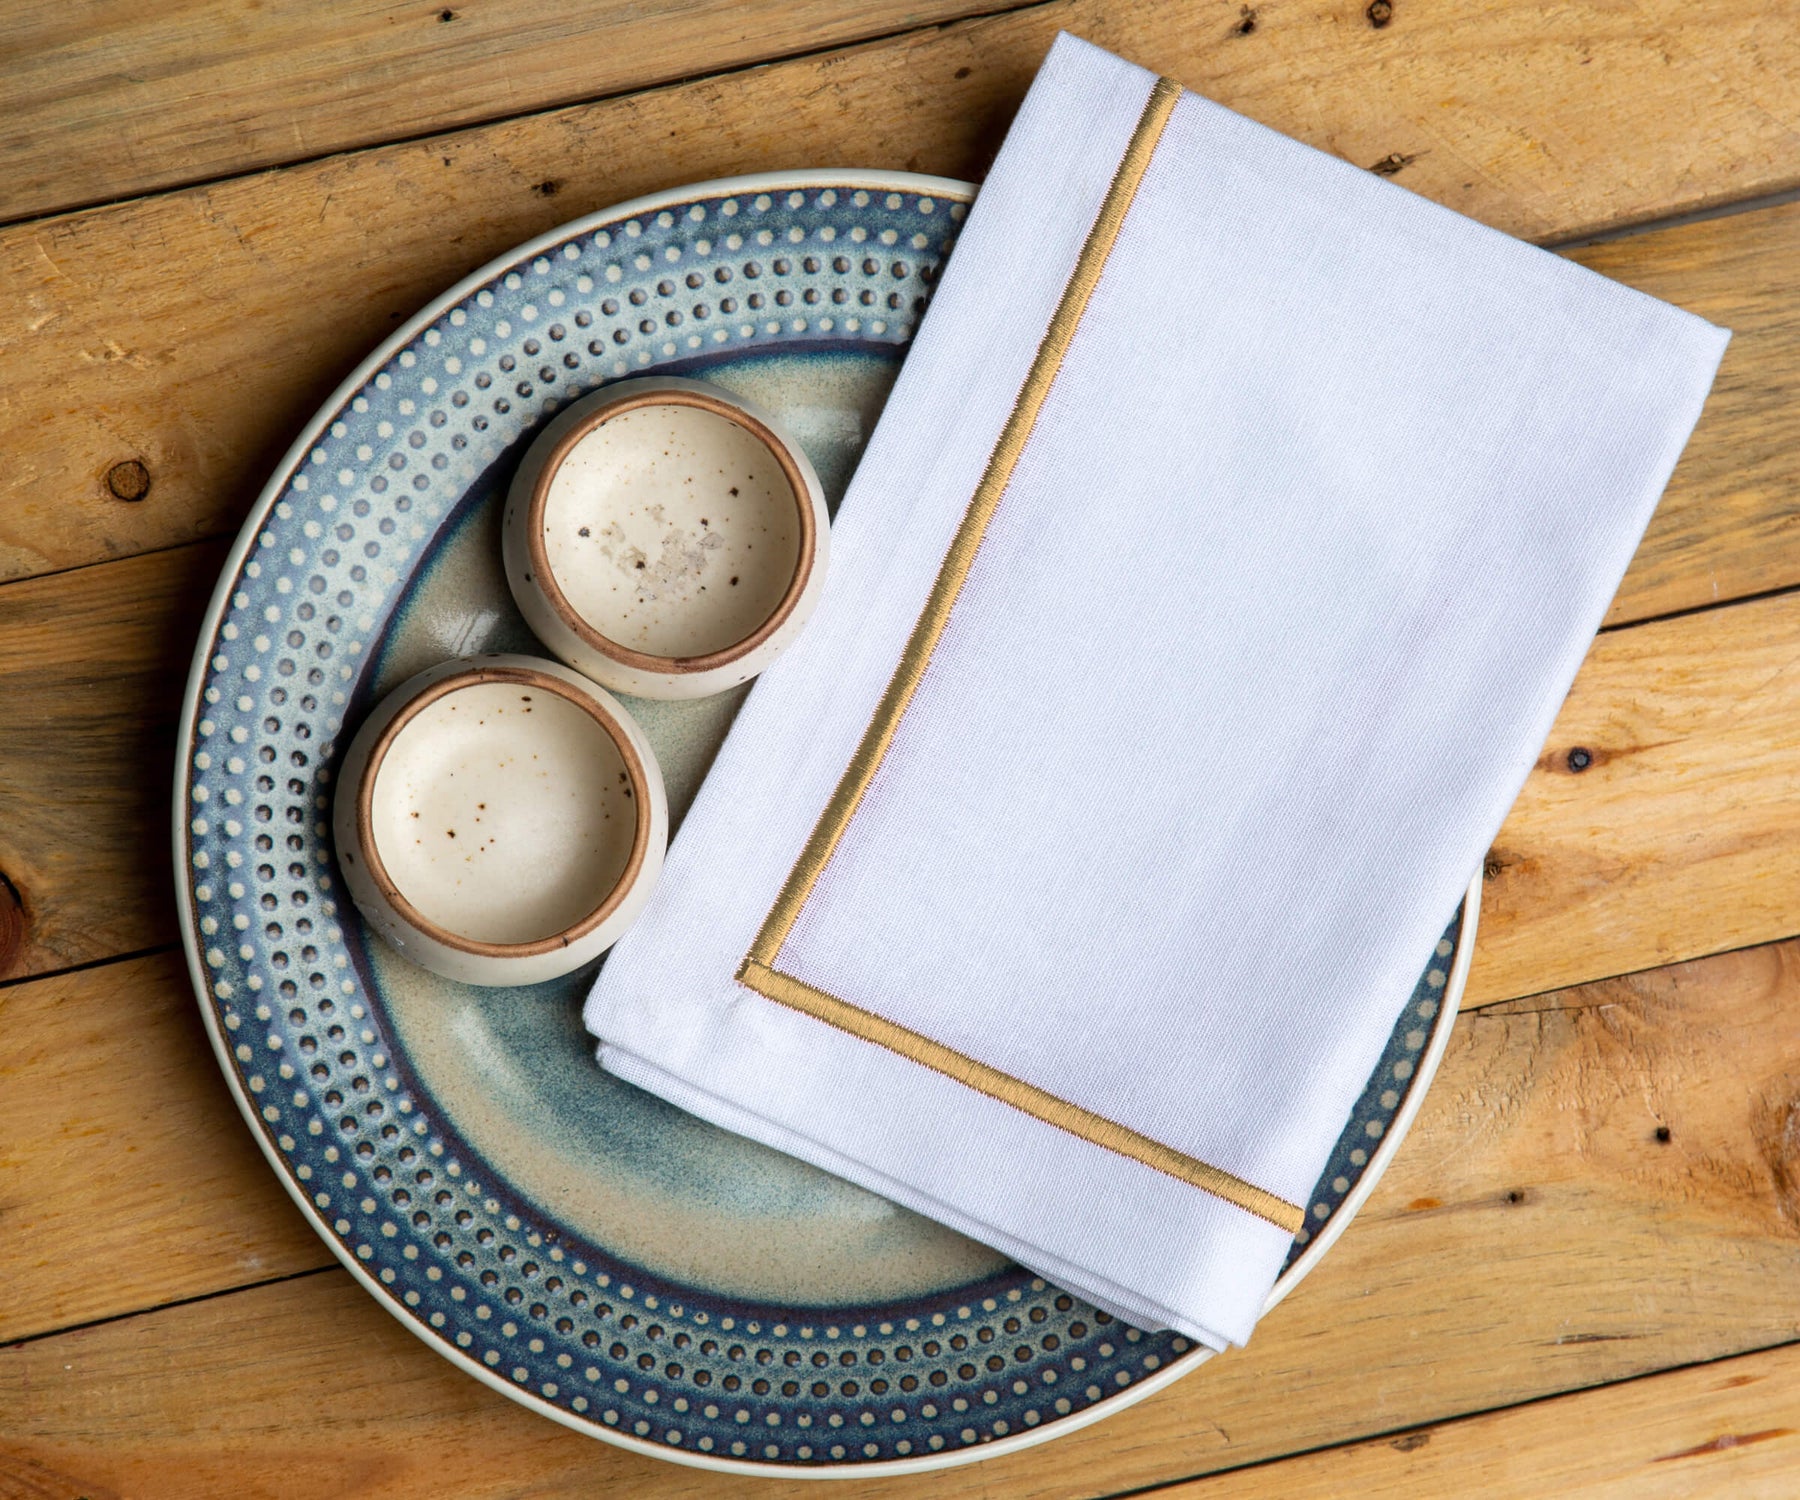 Dinner setting with white plates, two cups, and a white dinner napkin